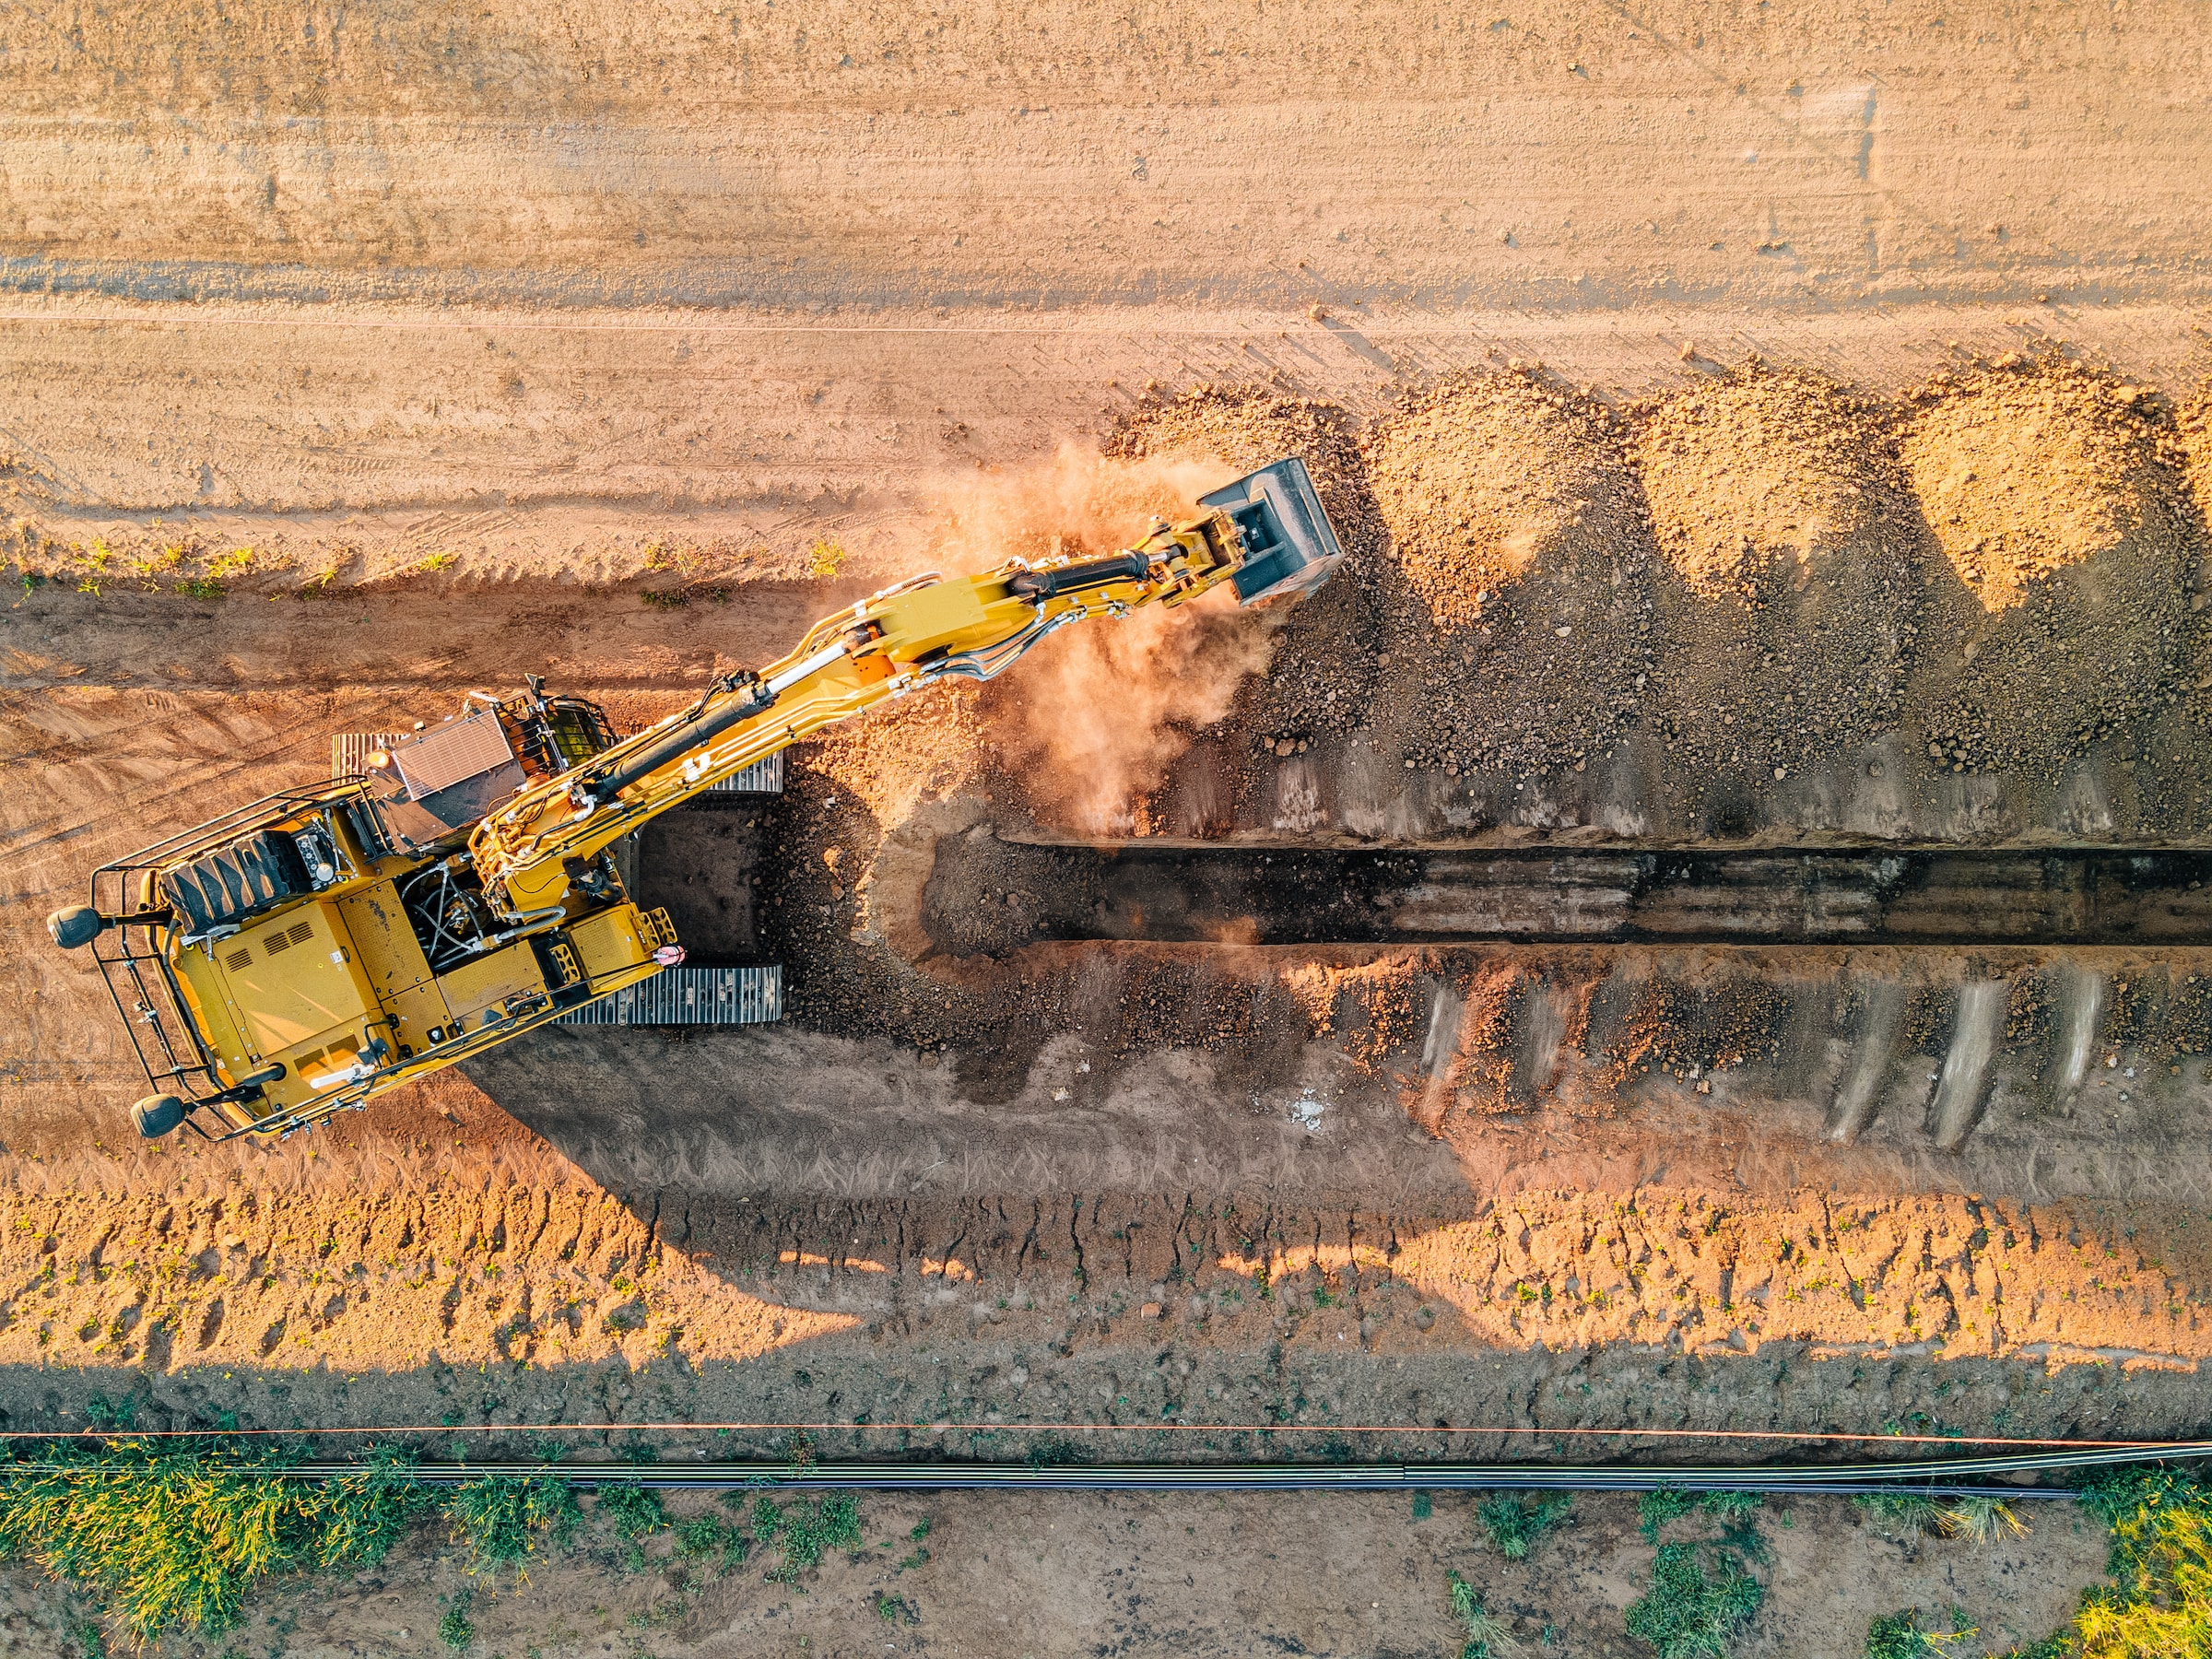 birds eye view of machinery at a mine site